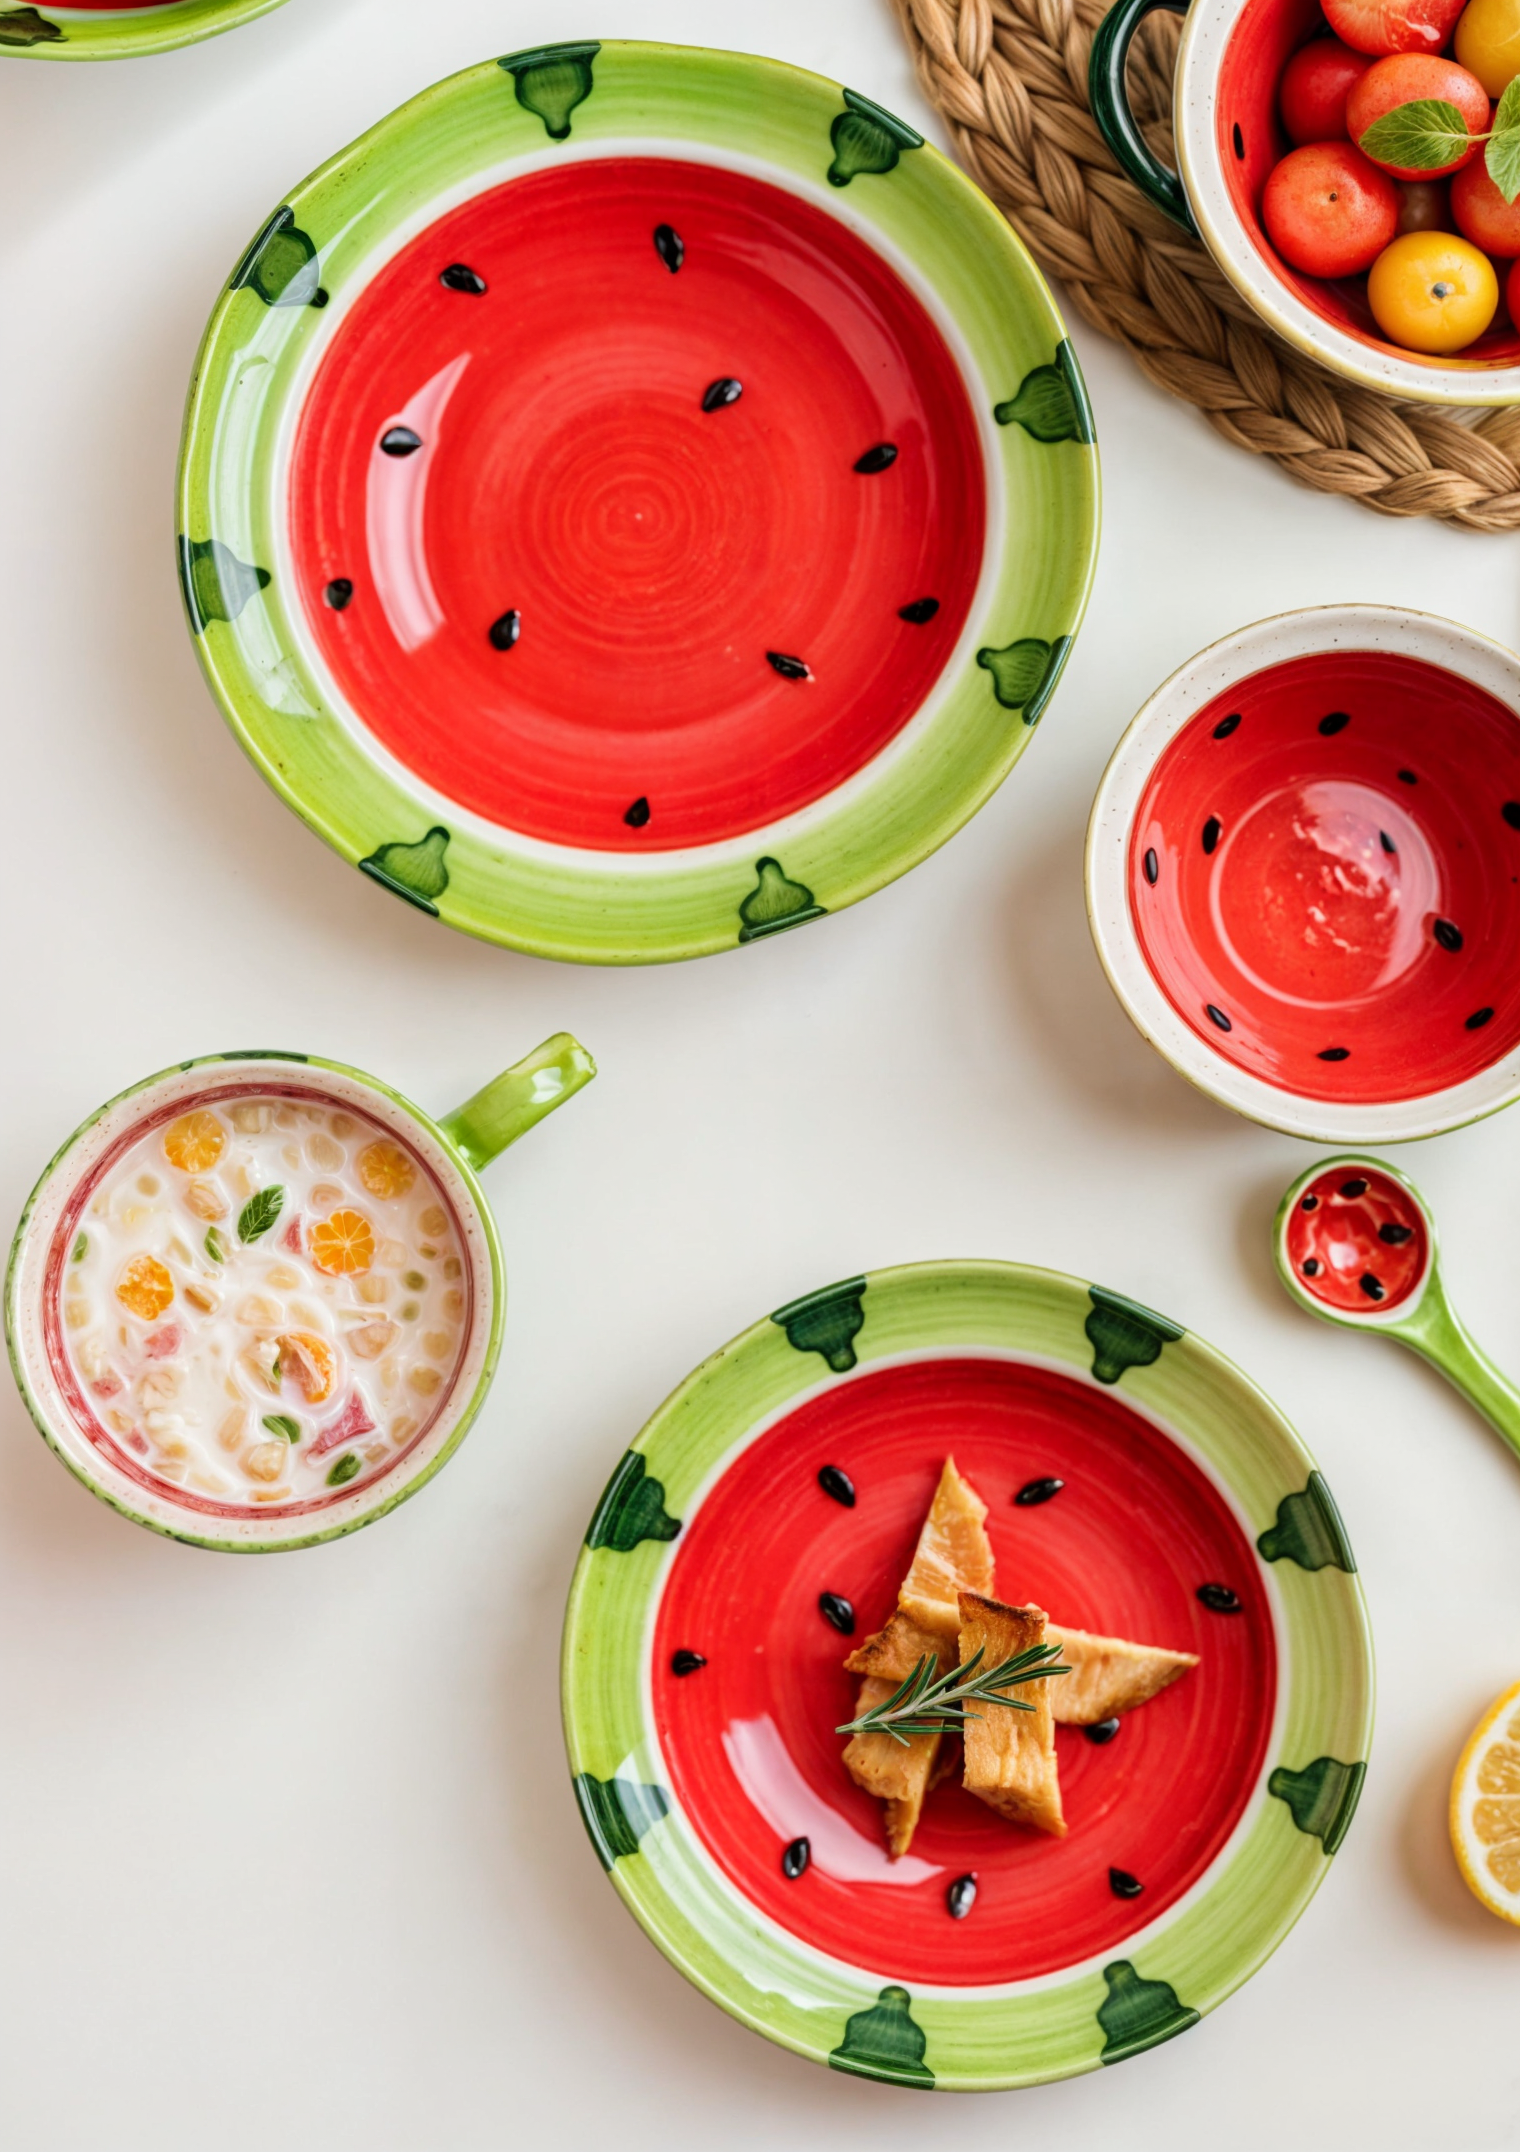 The Watermelon Dishes